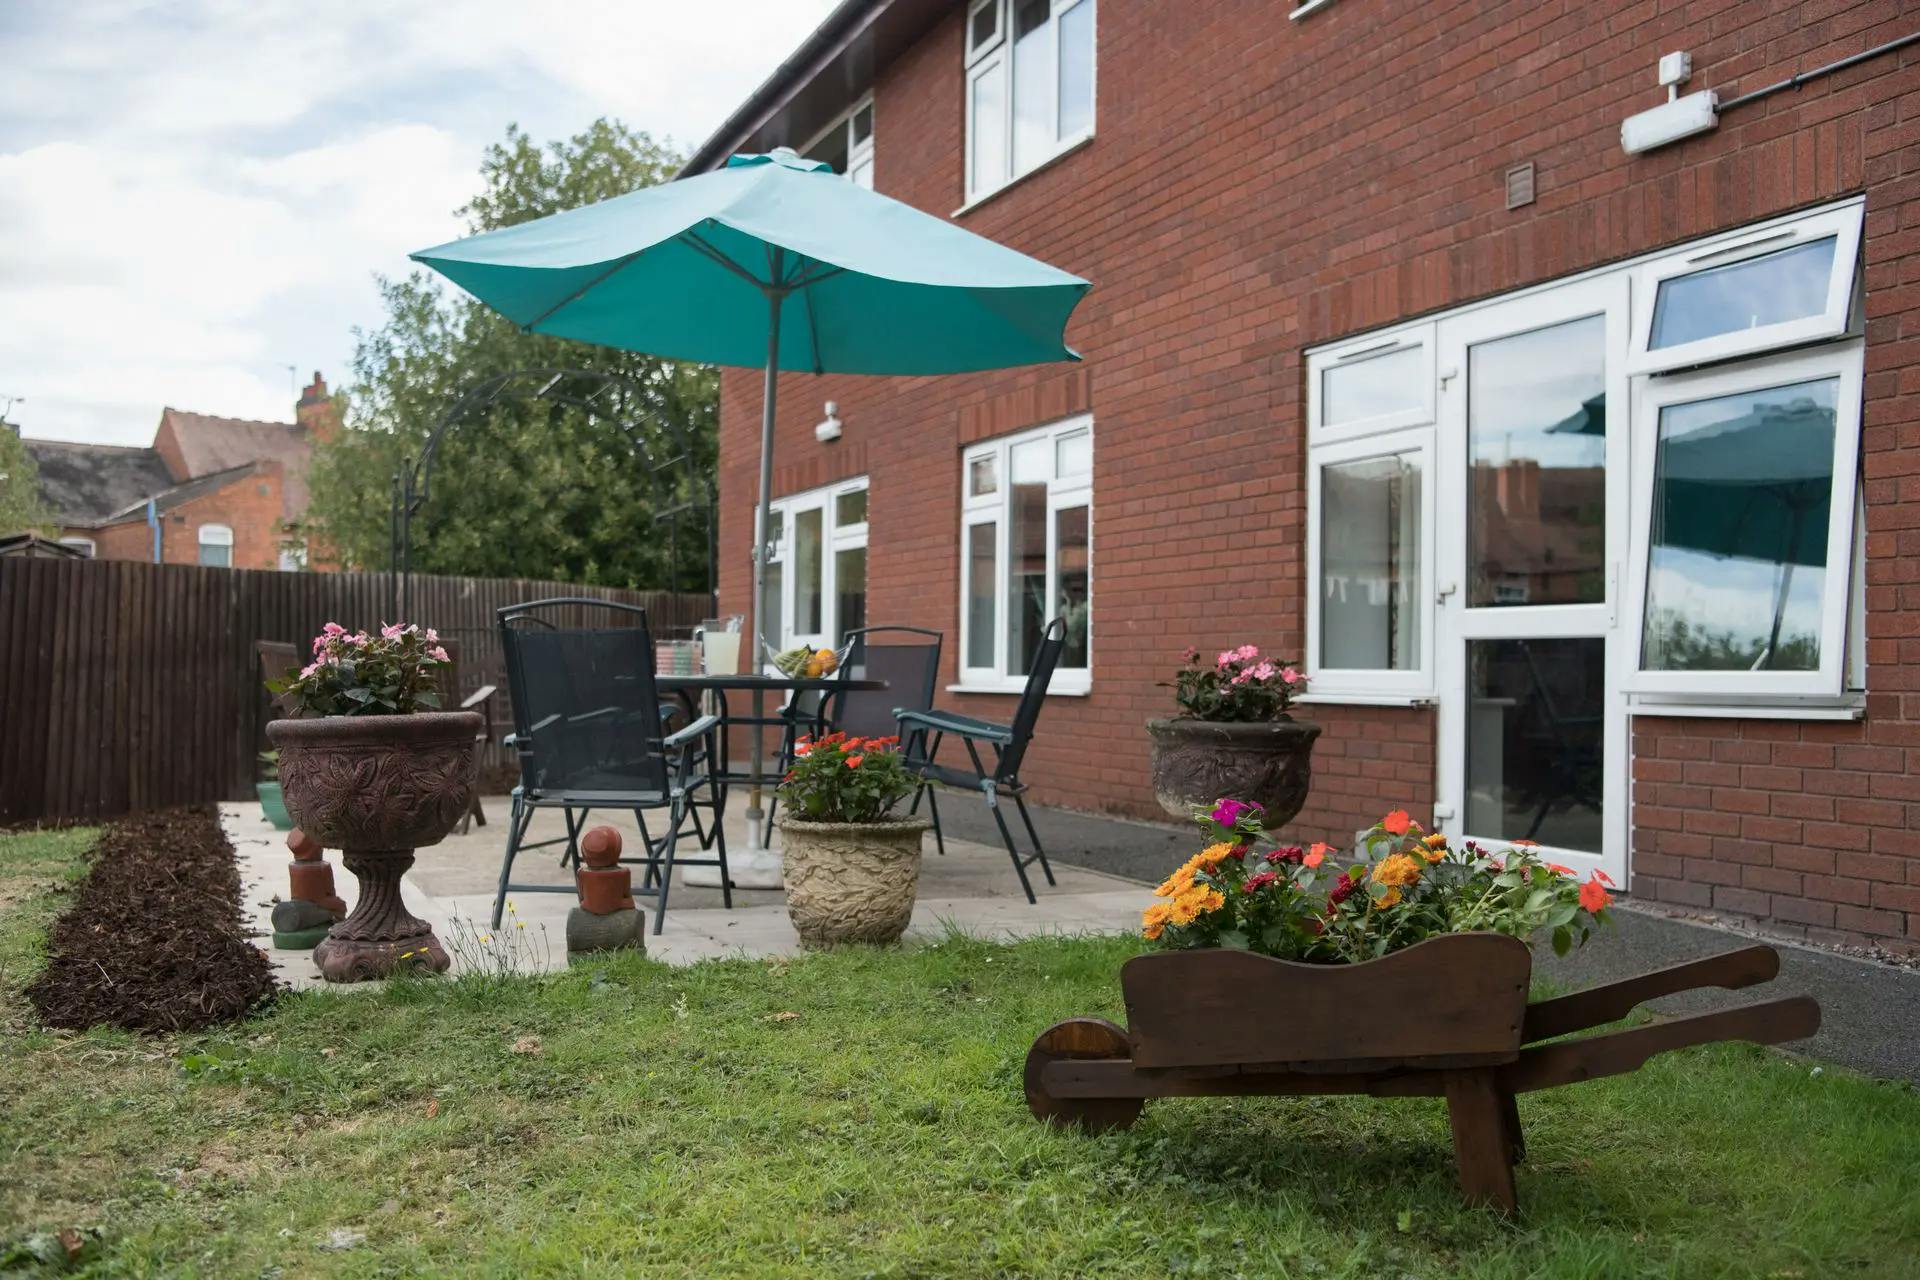 Garden at Gilawood Court Care Home in Nuneaton, Warwickshire